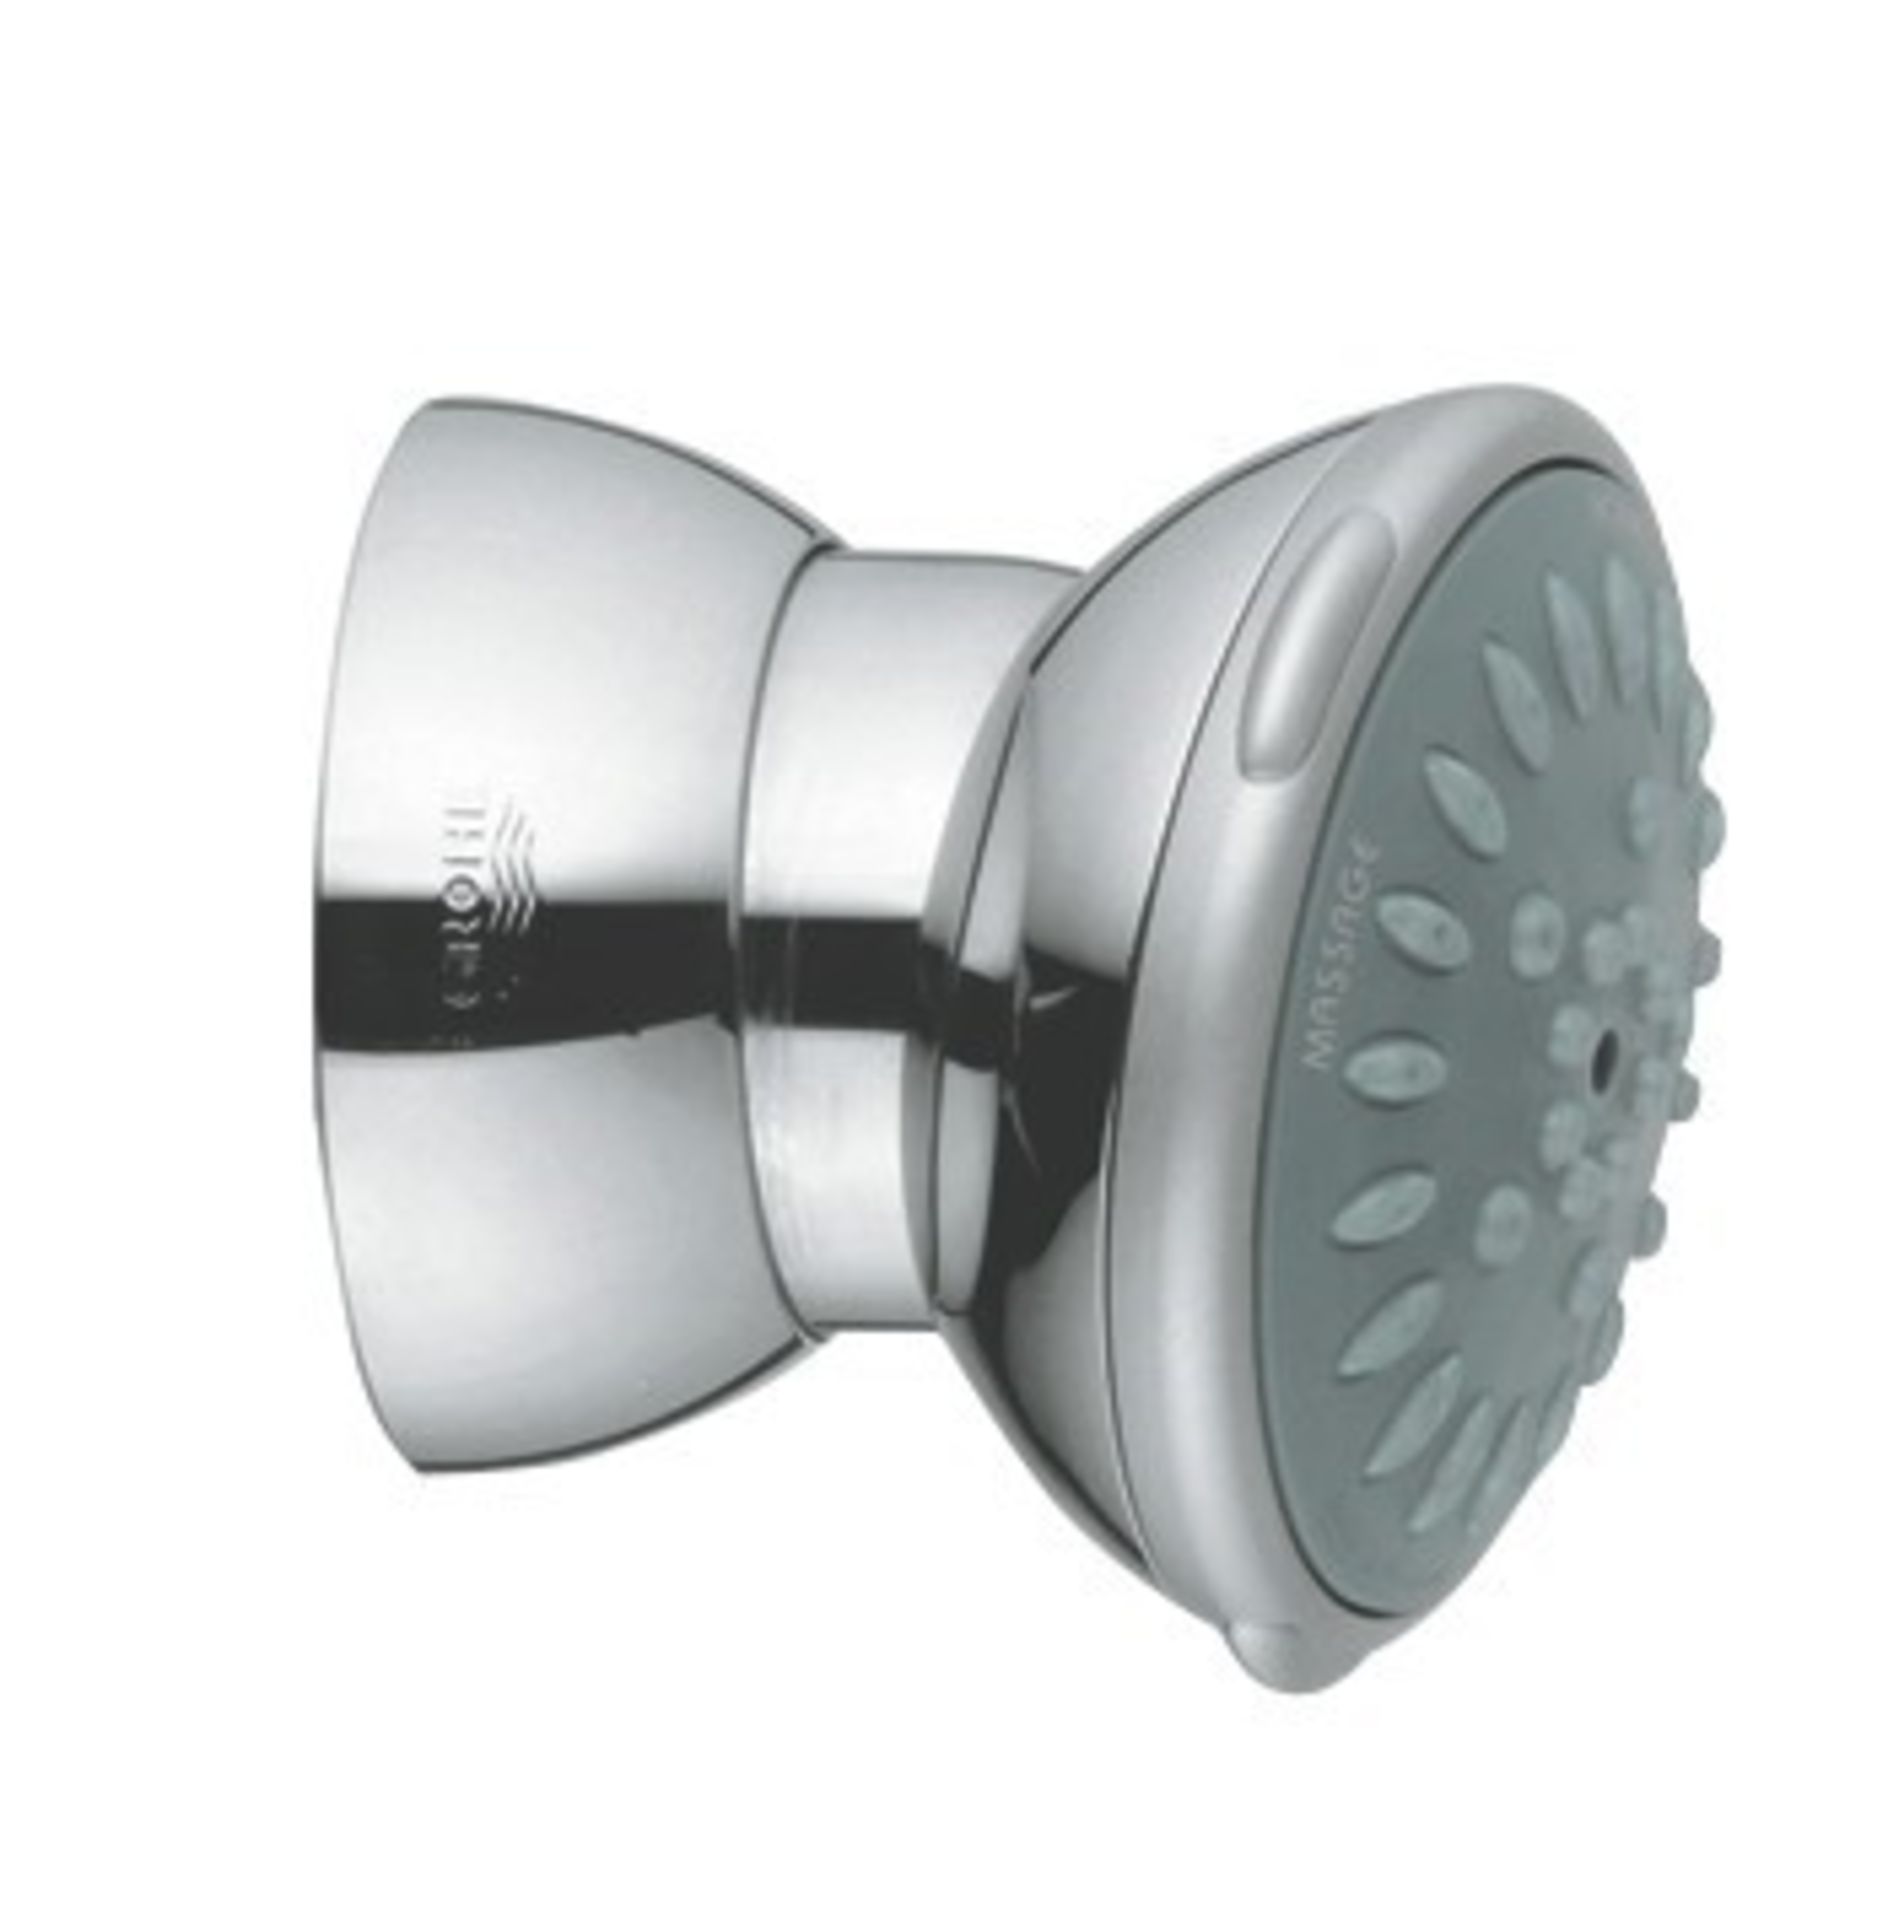 1 x Grohe Movario Side Shower Massage - Chrome Finish - Model: 28517000 - New & Boxed - CL088 - Loca - Image 3 of 4